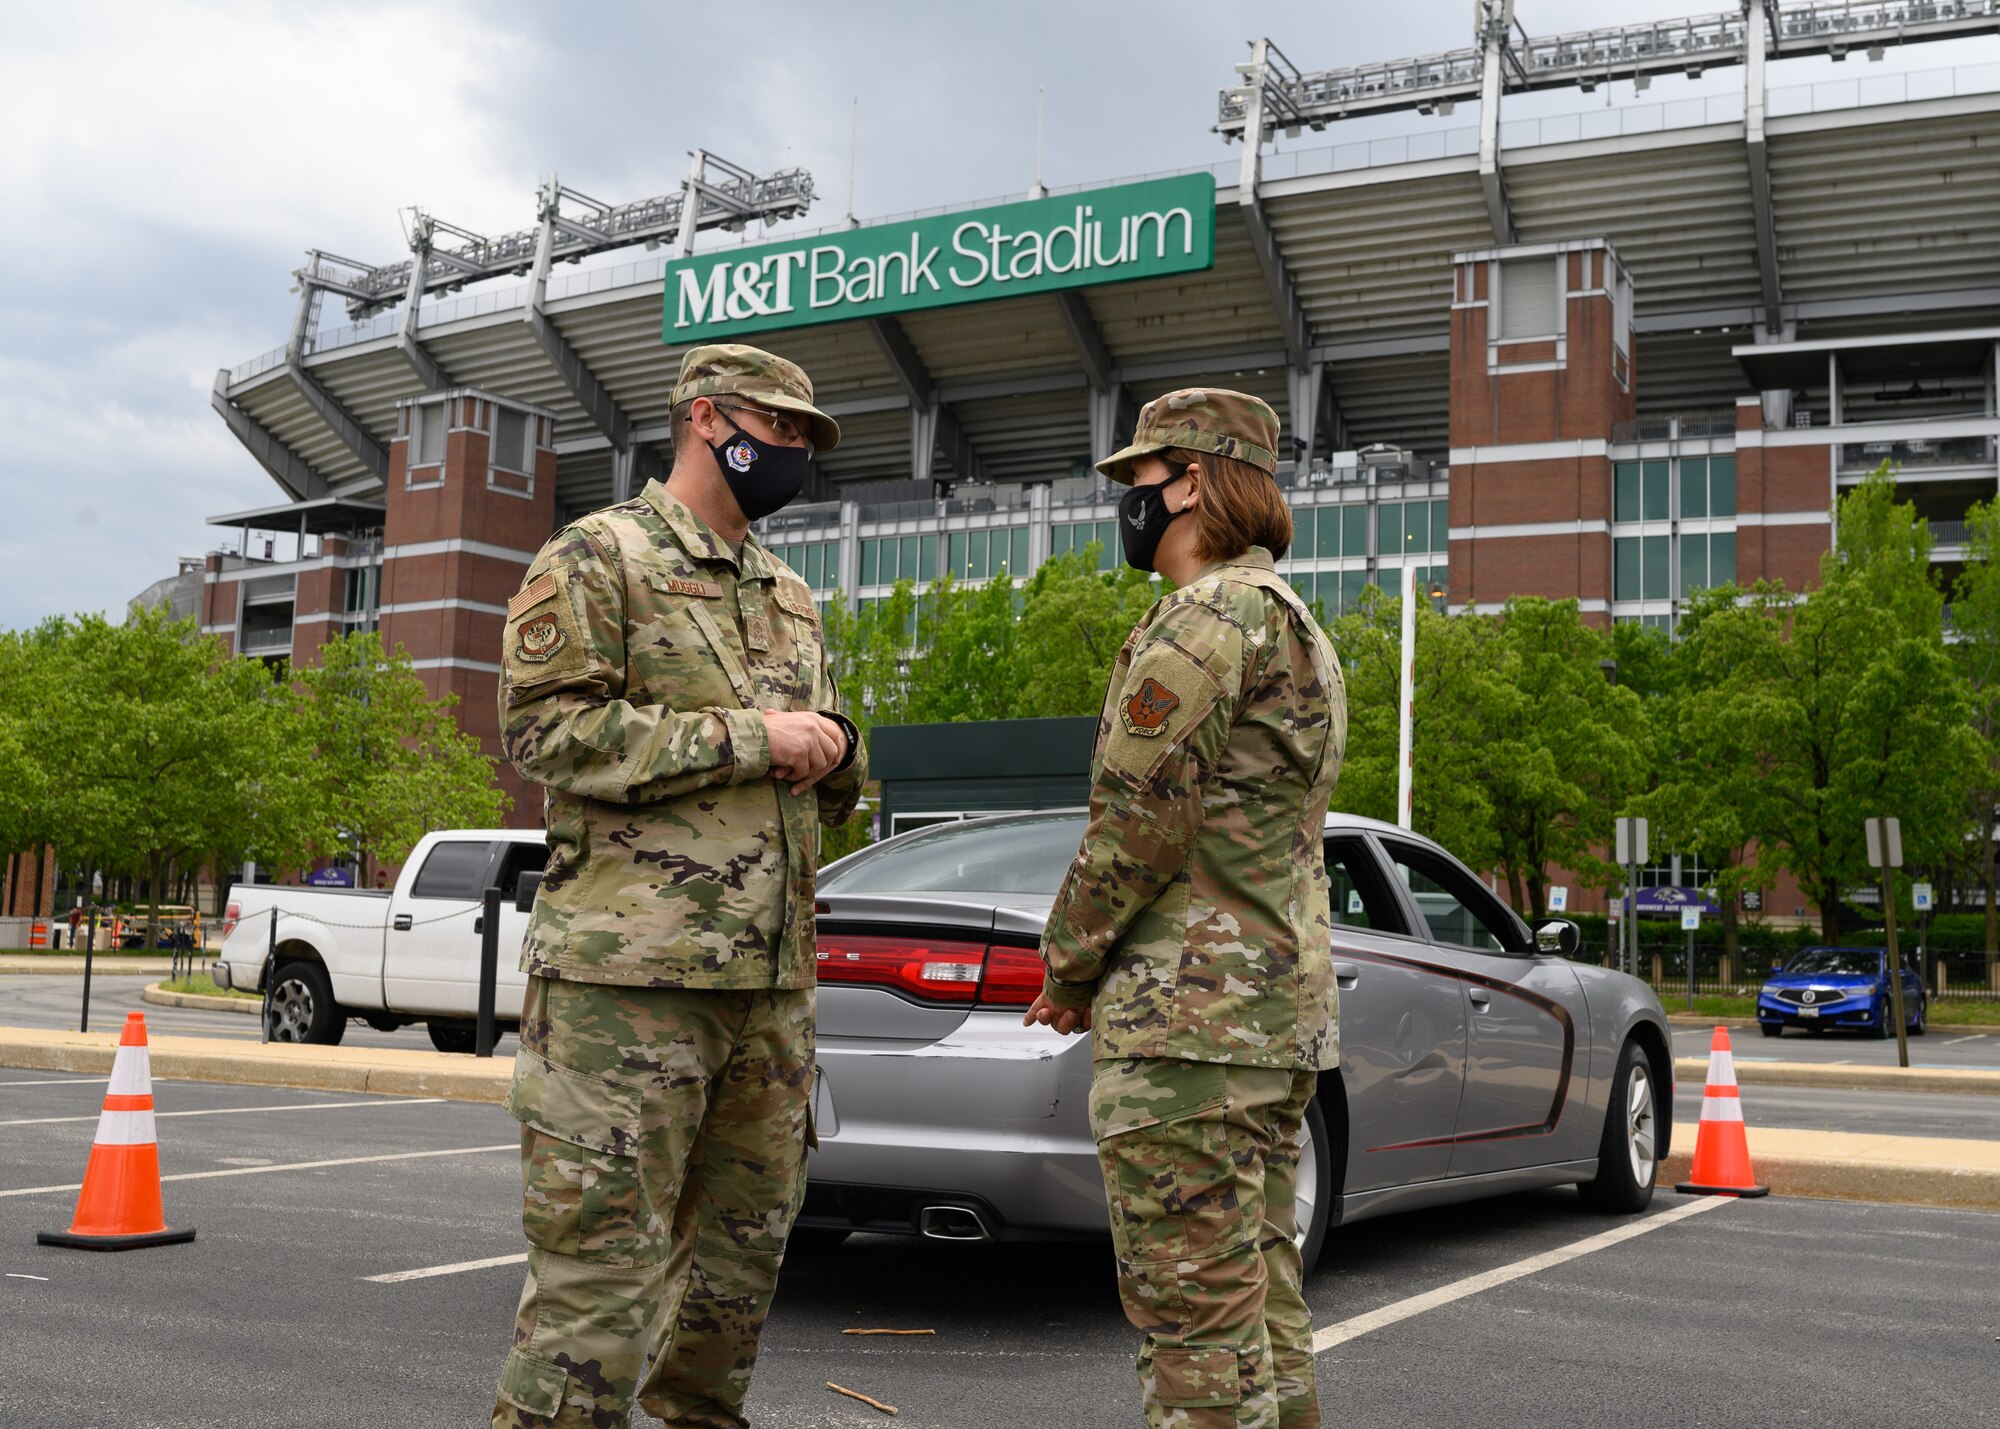 (From left) Chief Master Sgt. Paul Muggli, command chief for the 175th Wing, speaks with Chief Master Sgt. of the Air Force JoAnne S. Bass outside of the COVID-19 mass vaccination at M&T Bank Stadium, Baltimore, on May 3, 2021.